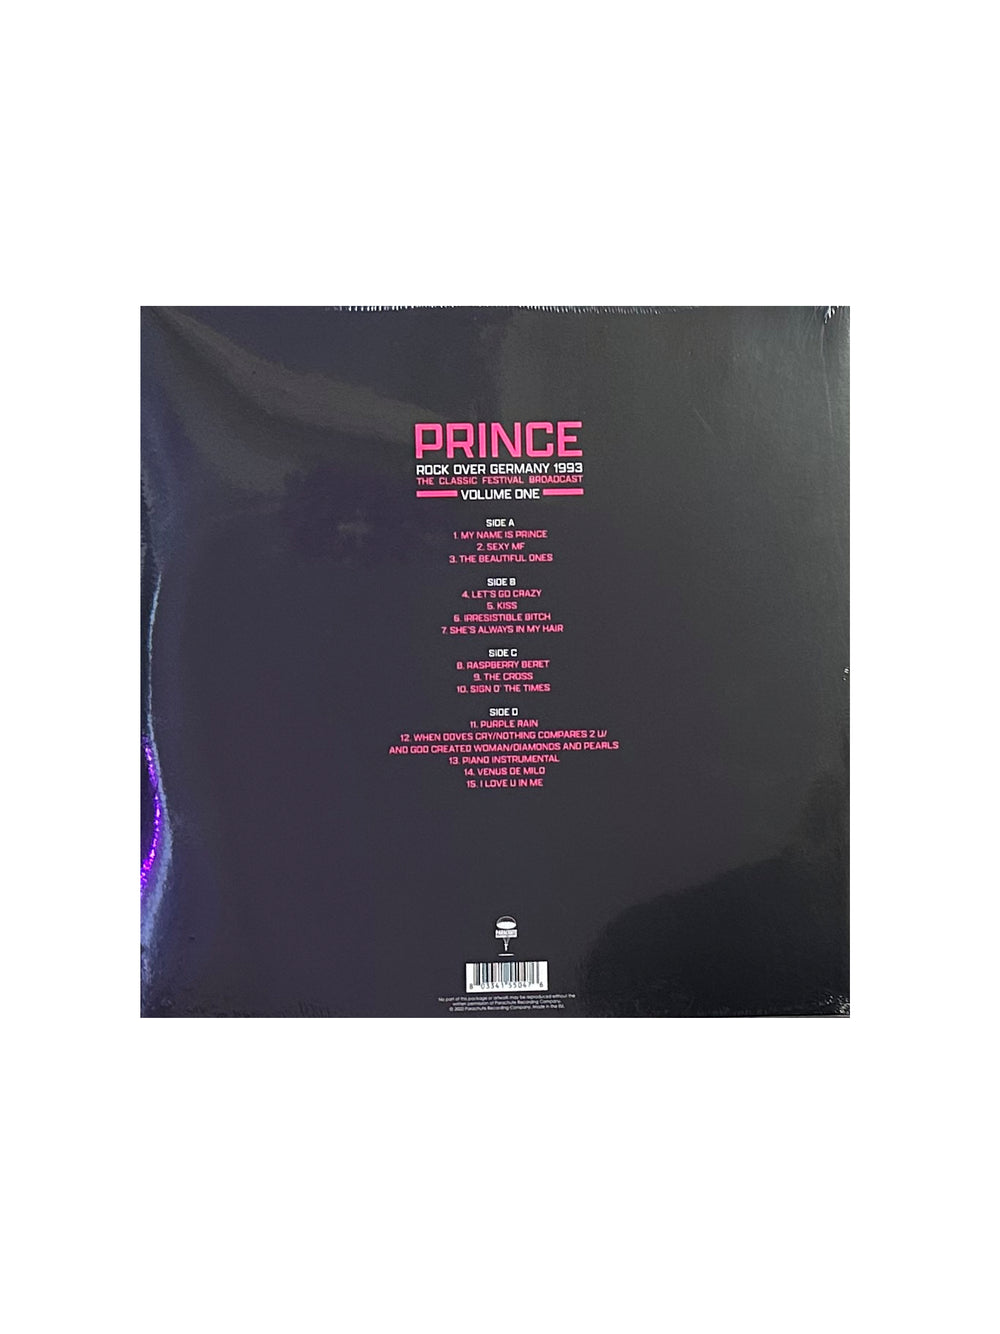 Prince – Rock Over Germany Vol 1 Vinyl LP x 2 Licence Approved: NEW 1993